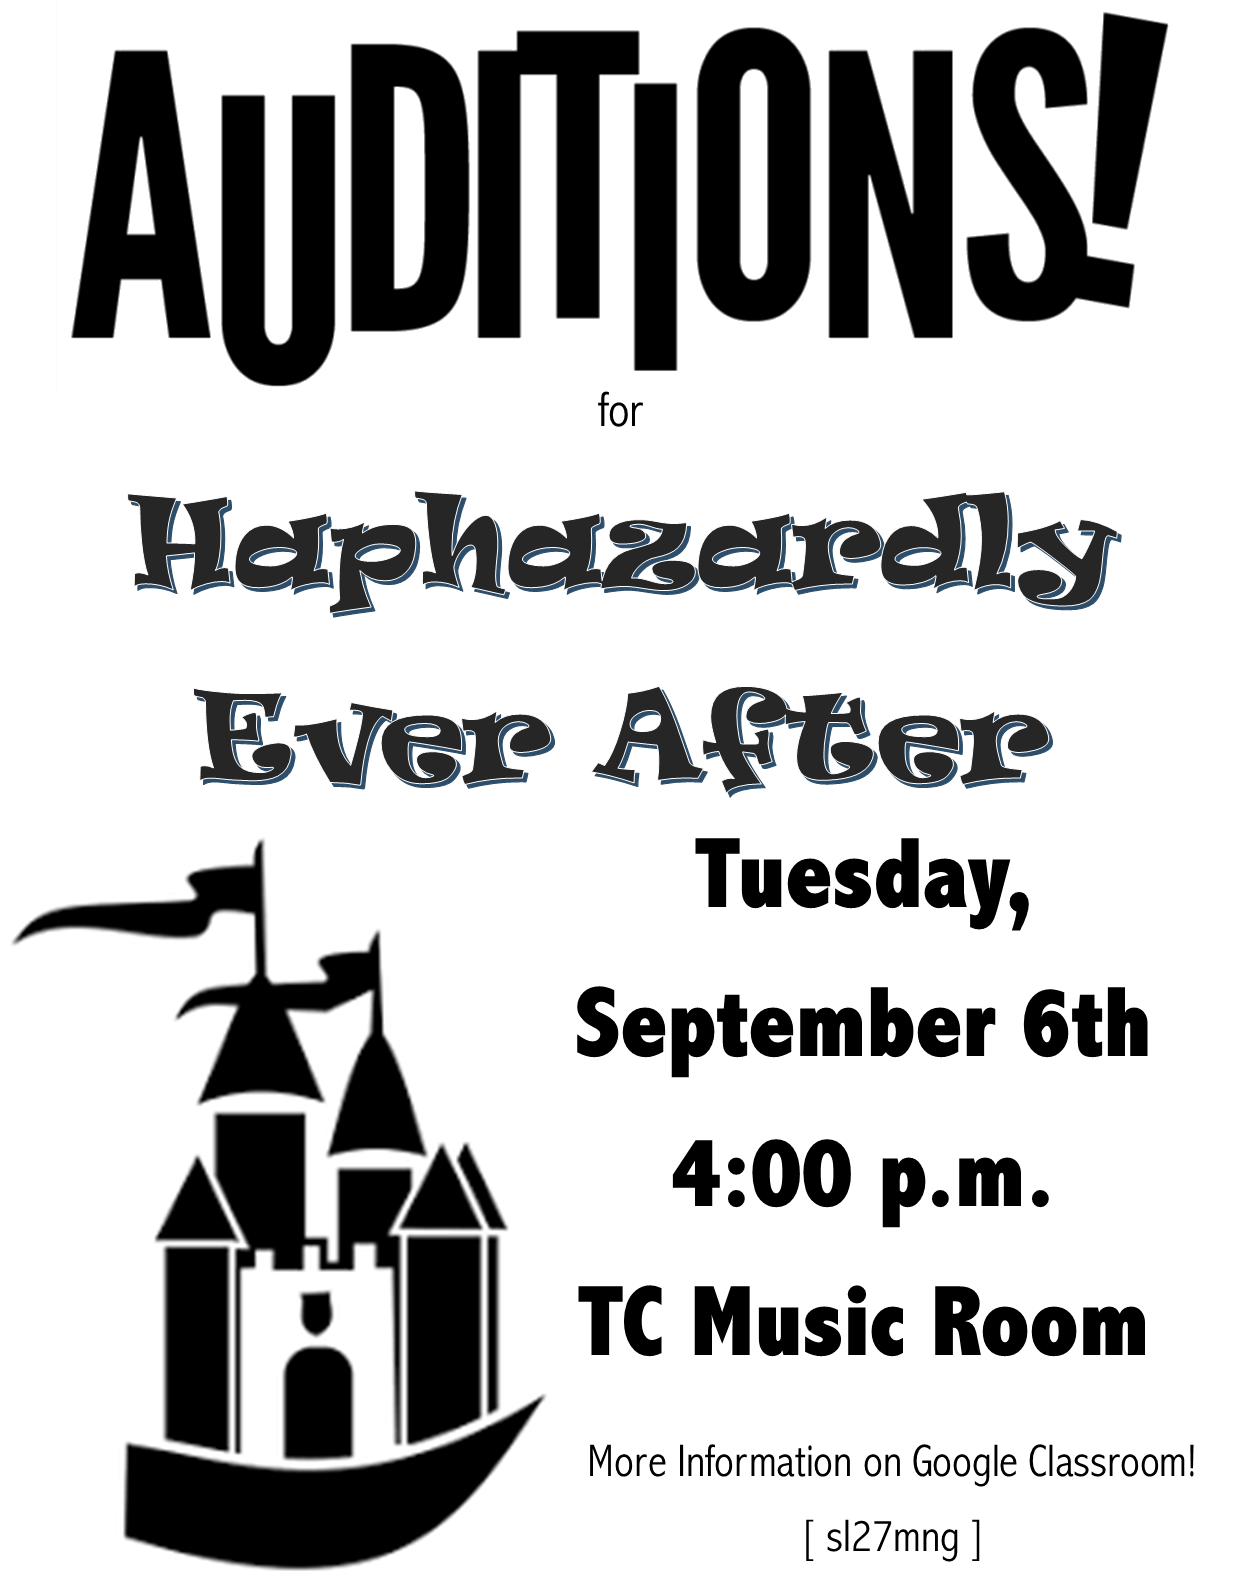 Auditions! for 'Haphazardly Ever After'  Tuesday, September 6th, 4:00pm, TC Music Room